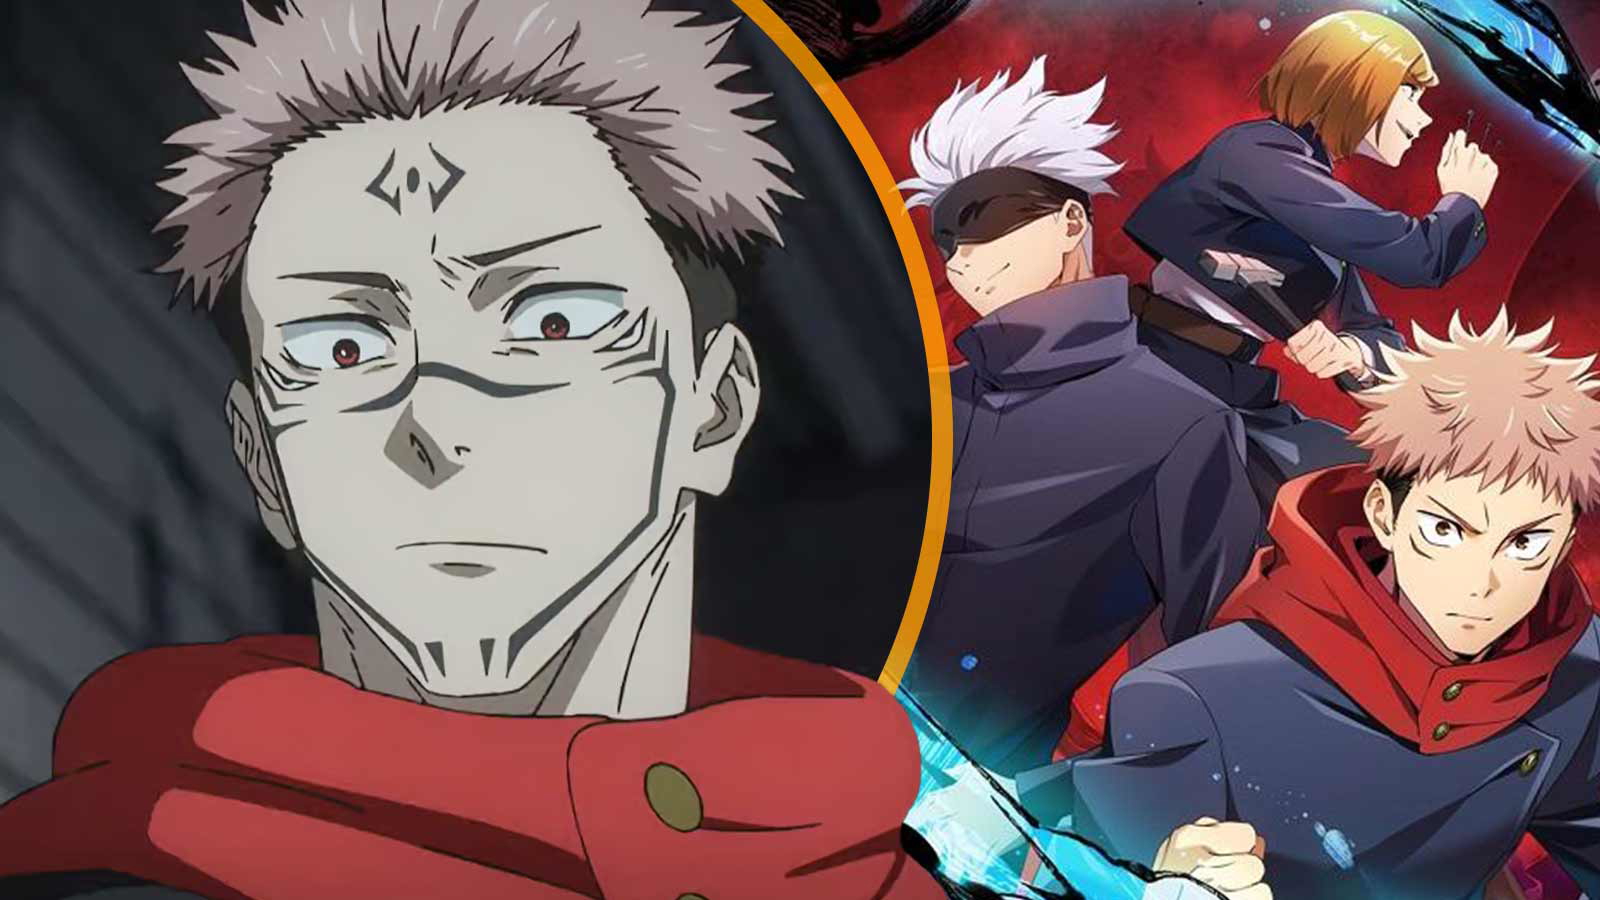 Sukuna’s Latest Trick Up His Sleeve Just Proves How Desperate He is in Front of the Strongest Pair of Jujutsu Kaisen